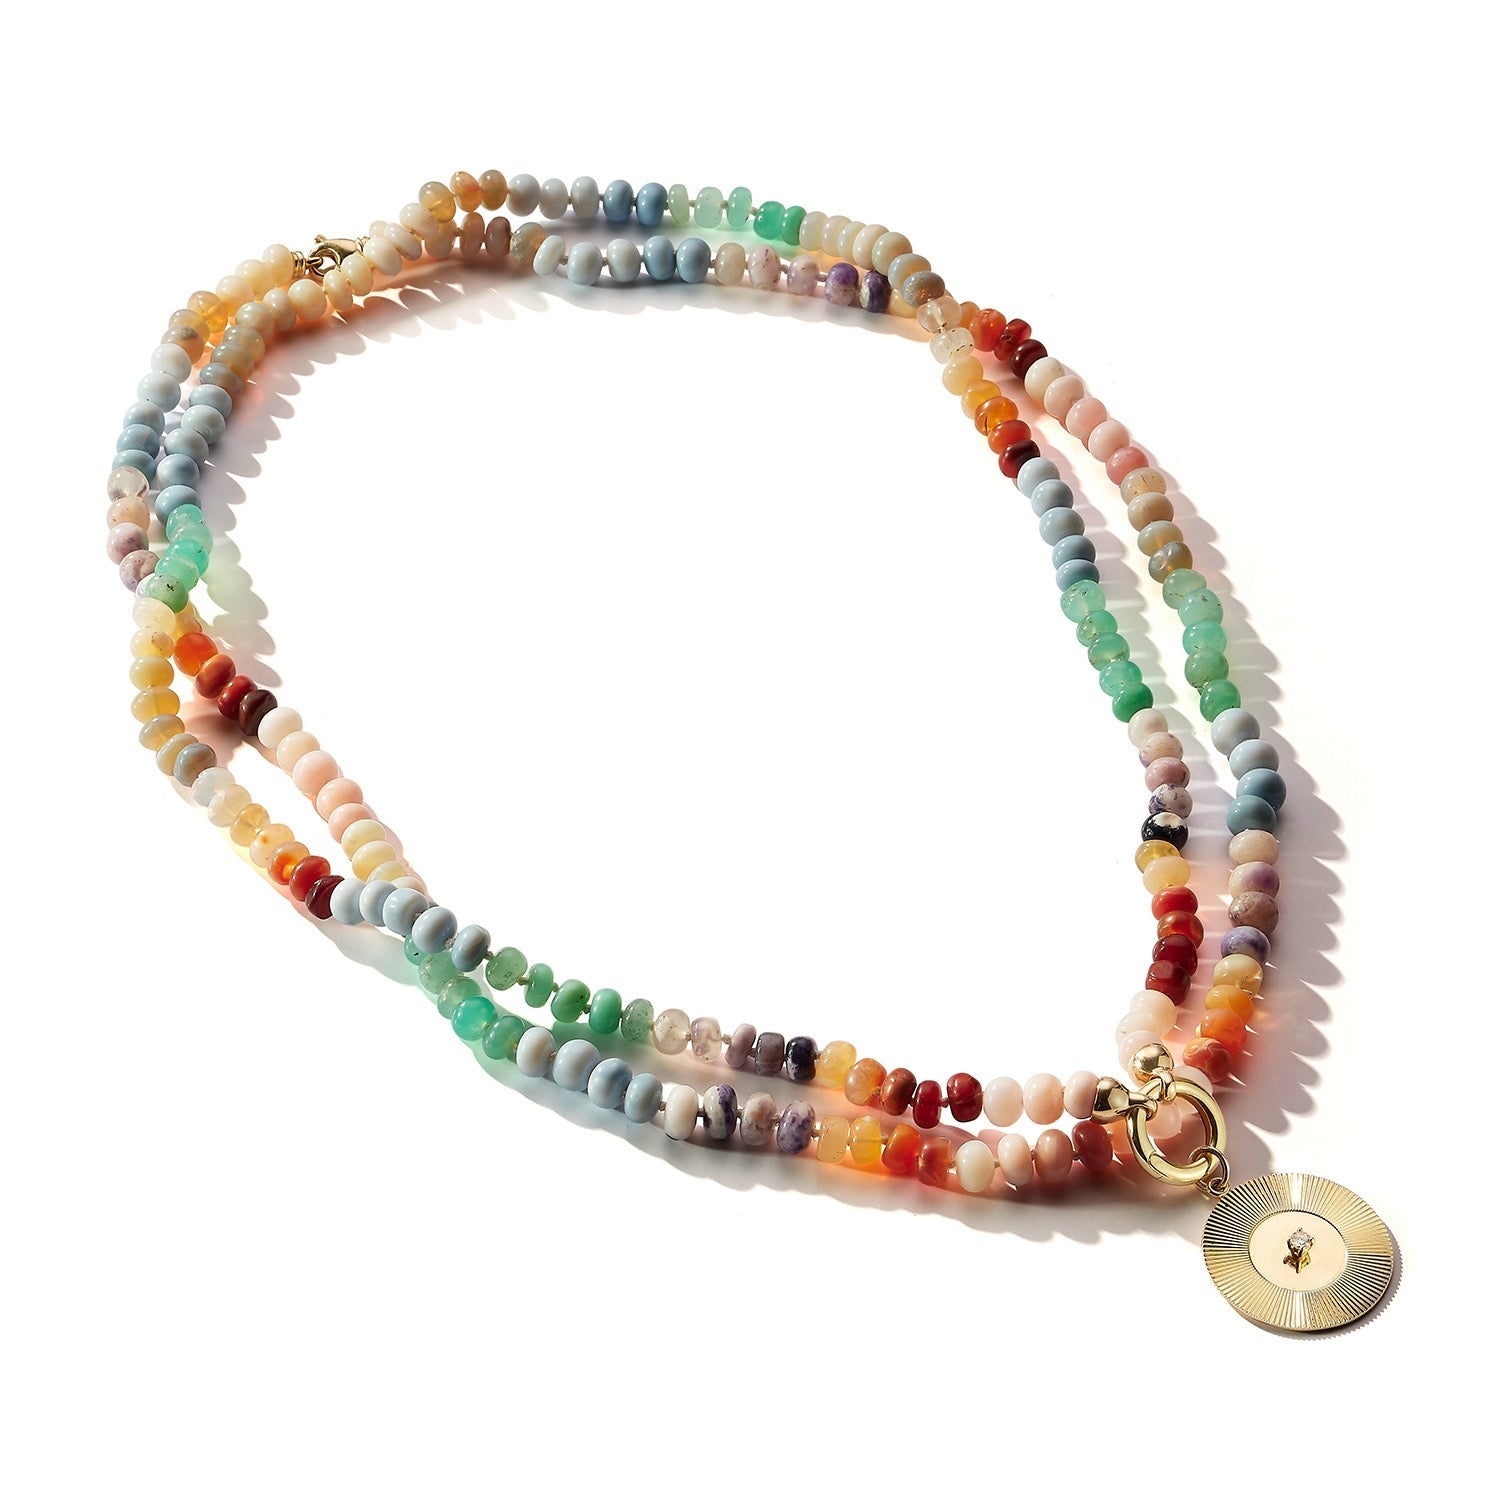 Multicolor Opal Necklaces with Charm Clasp